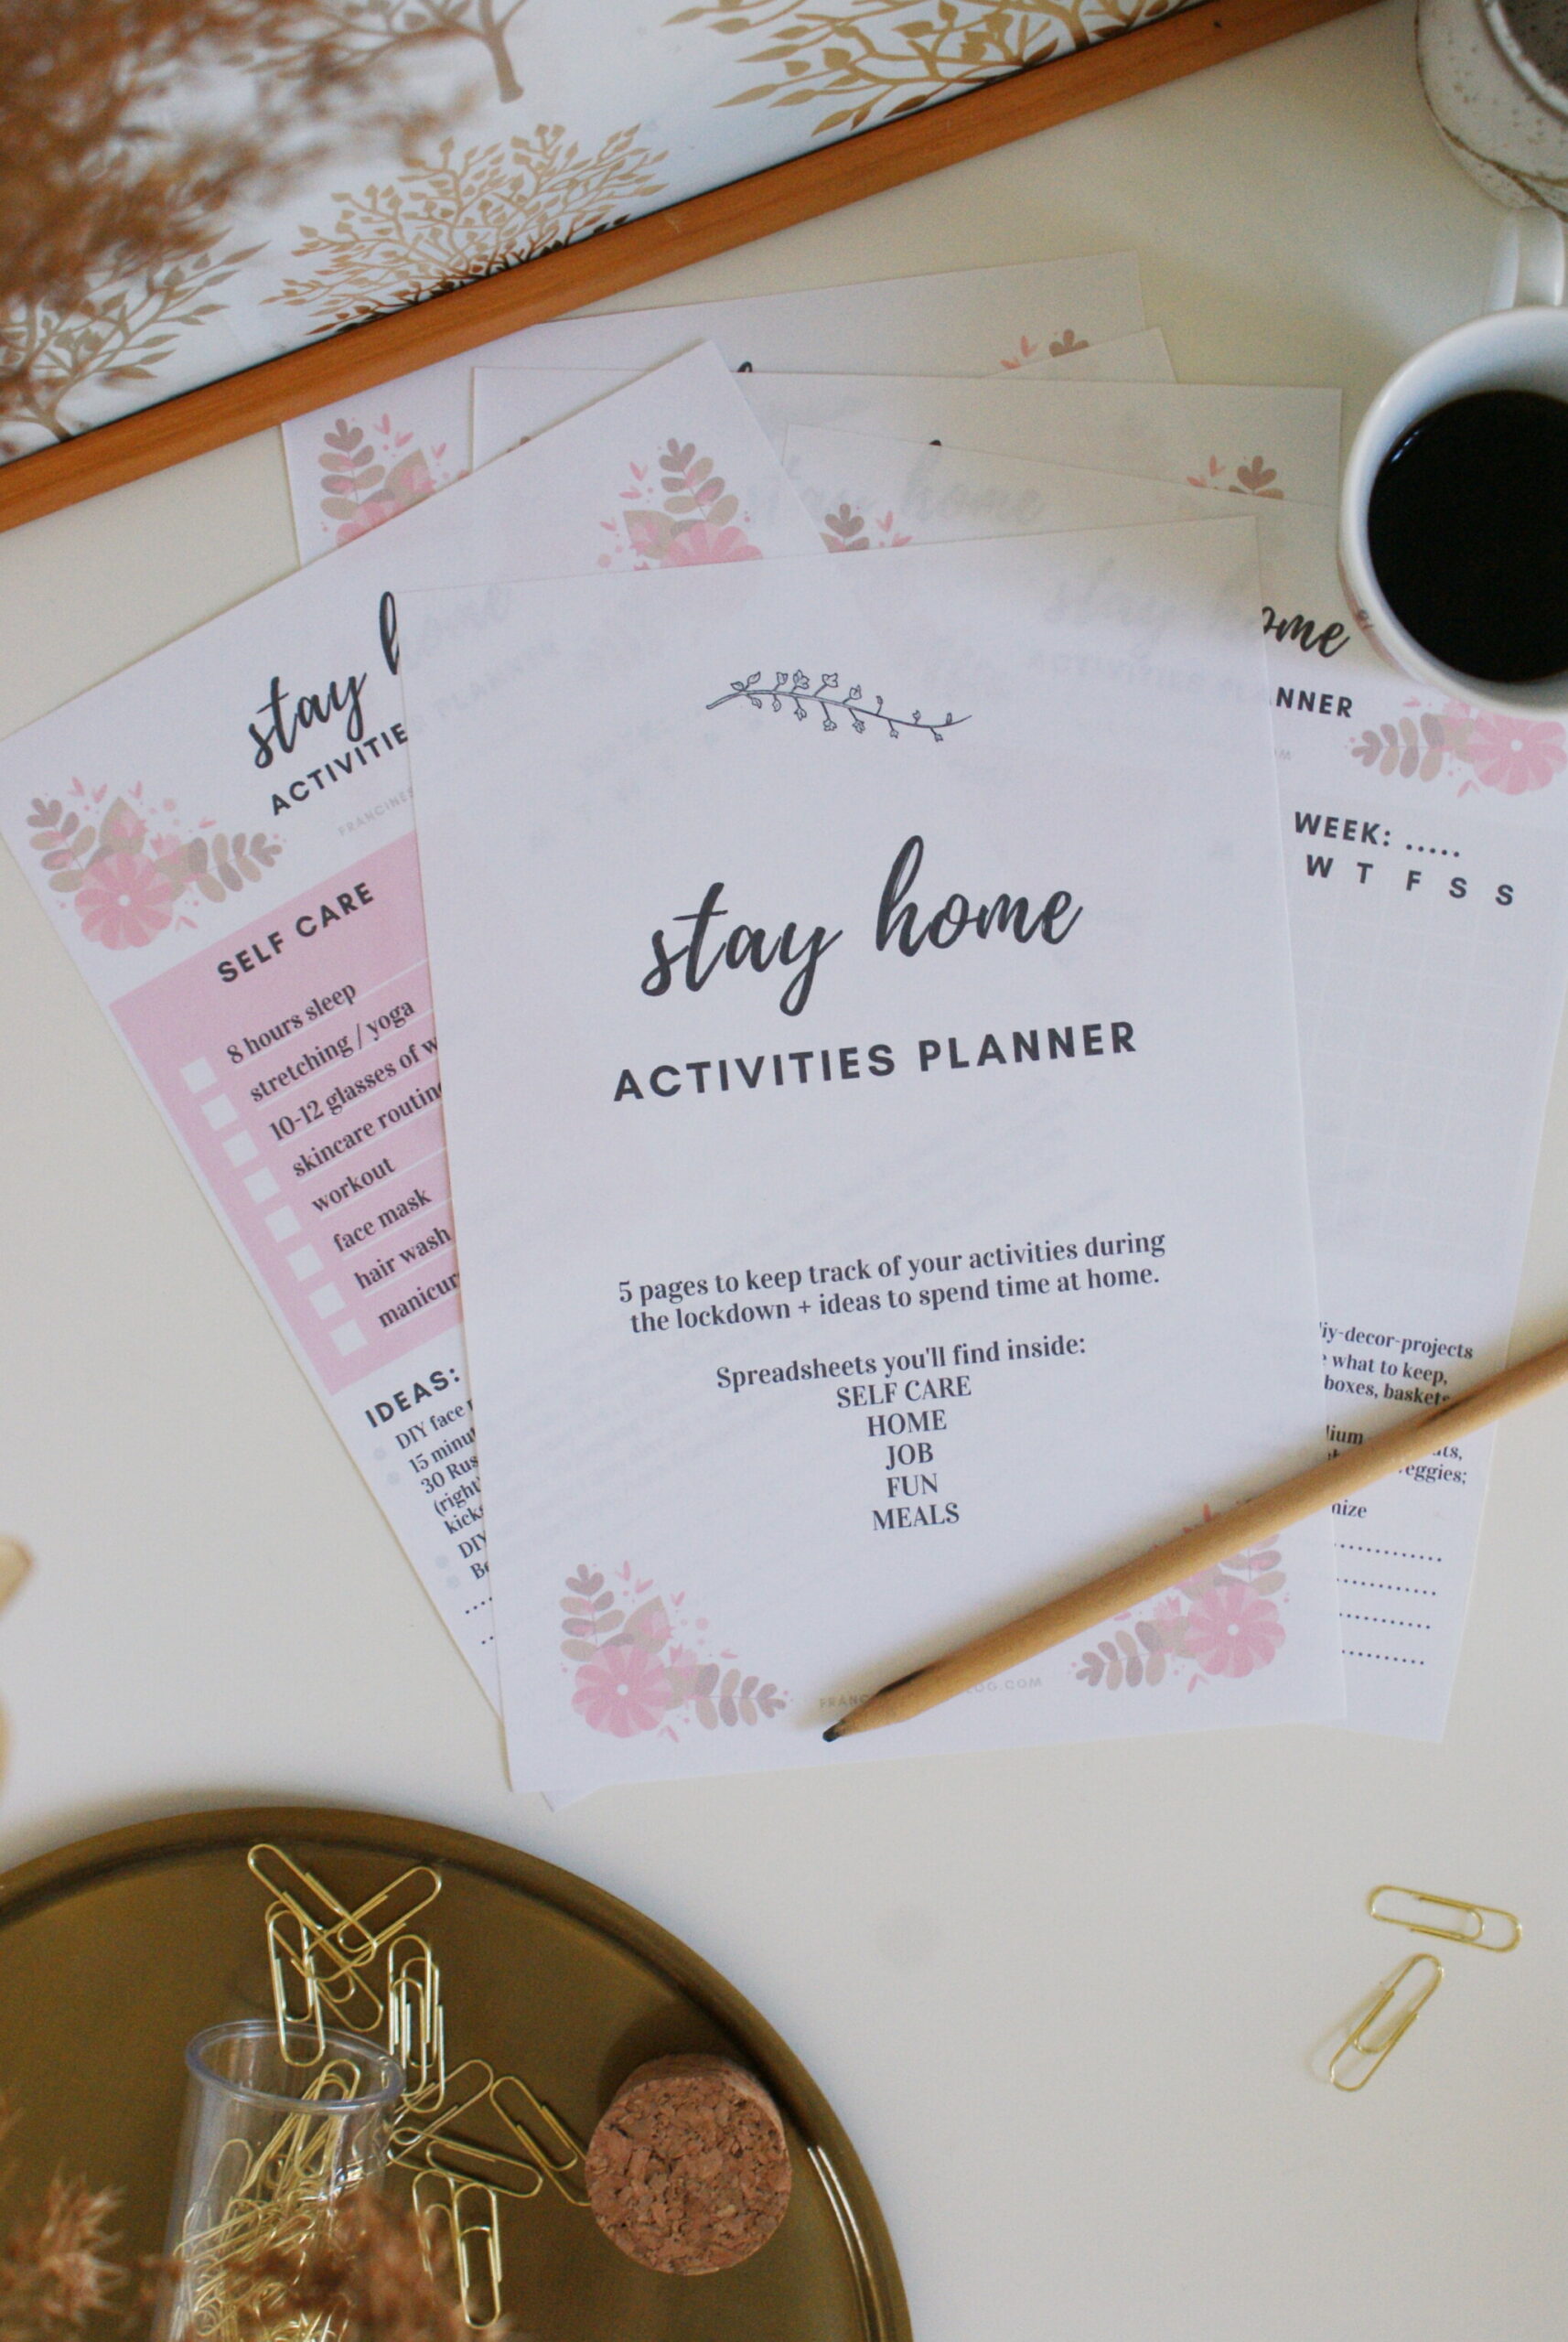 FREE PRINTABLE STAY HOME ACTIVITIES PLANNER WITH IDEAS TO SCHEDULE YOUR LOCKDOWN TIME